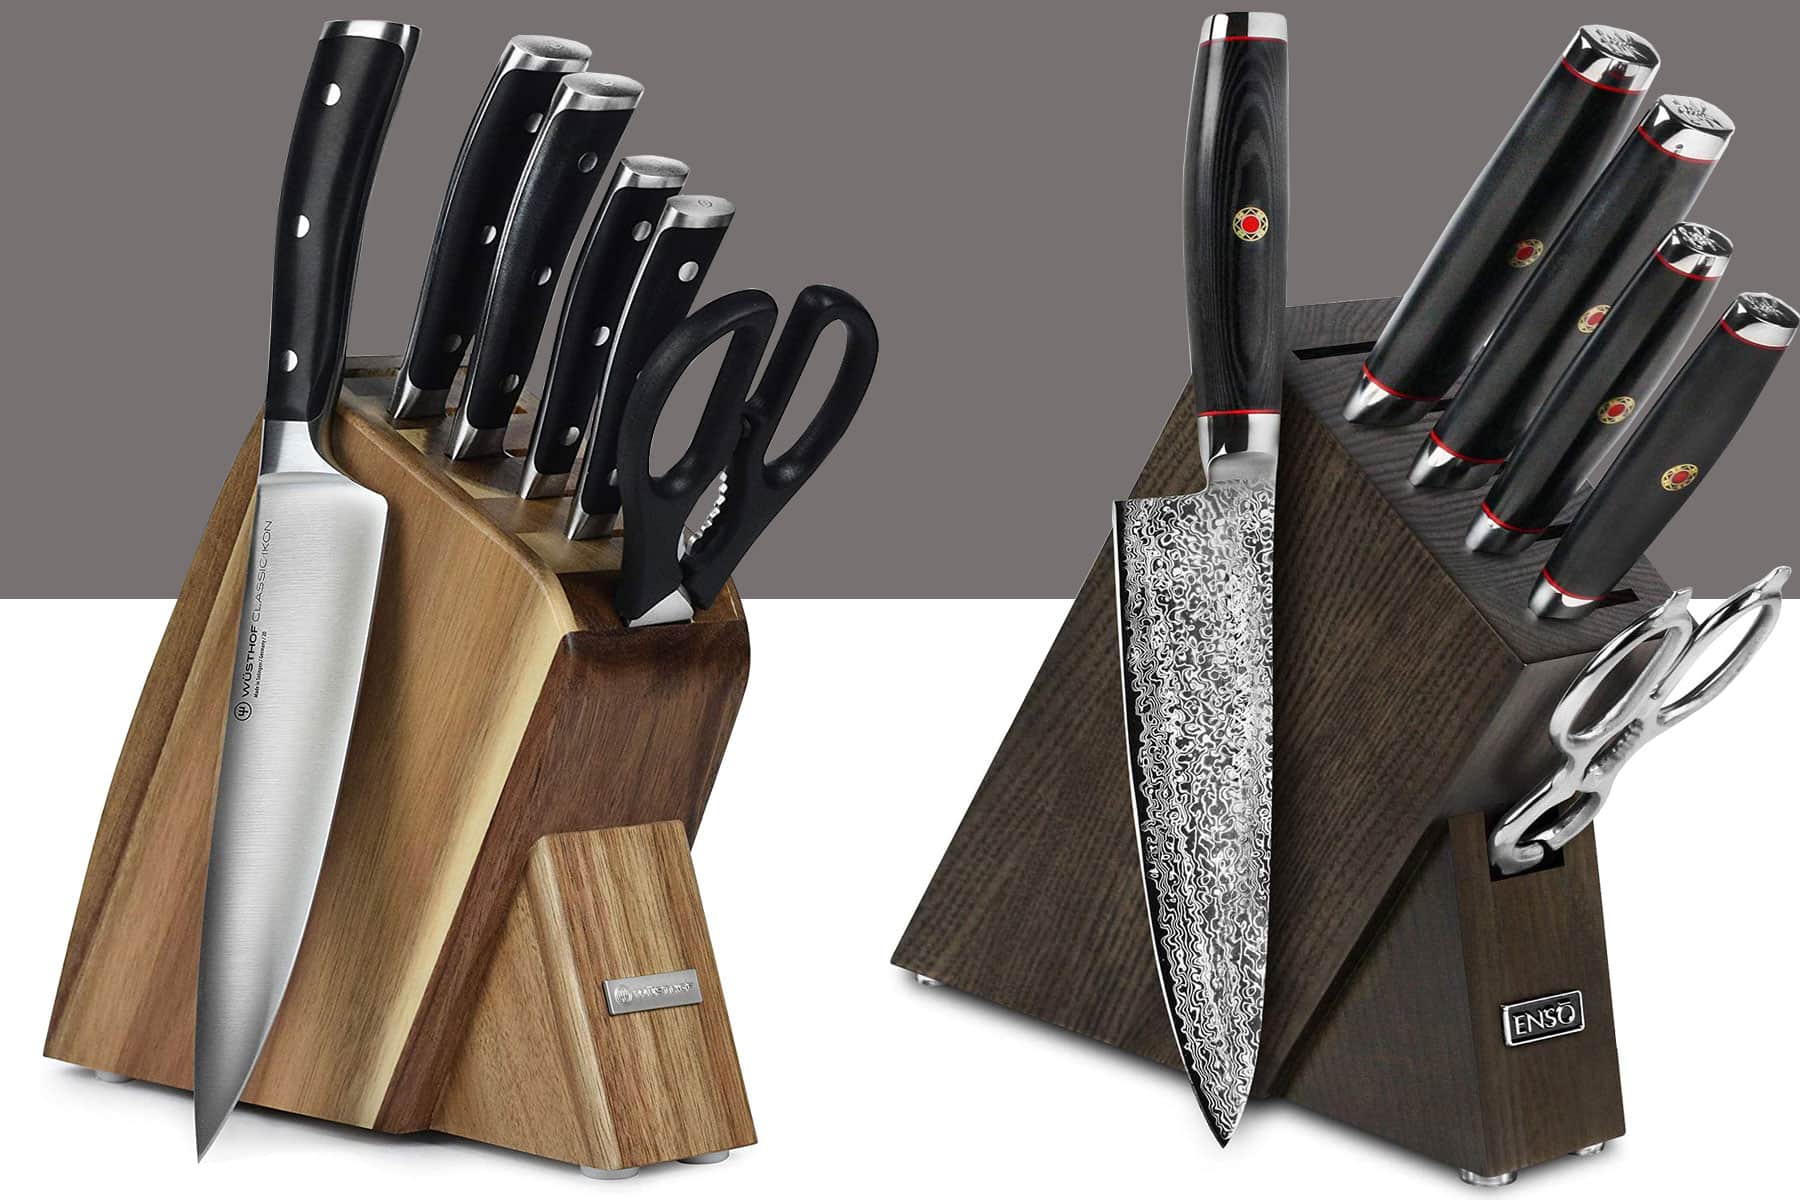 Two high-end knife sets on a gray and white background.